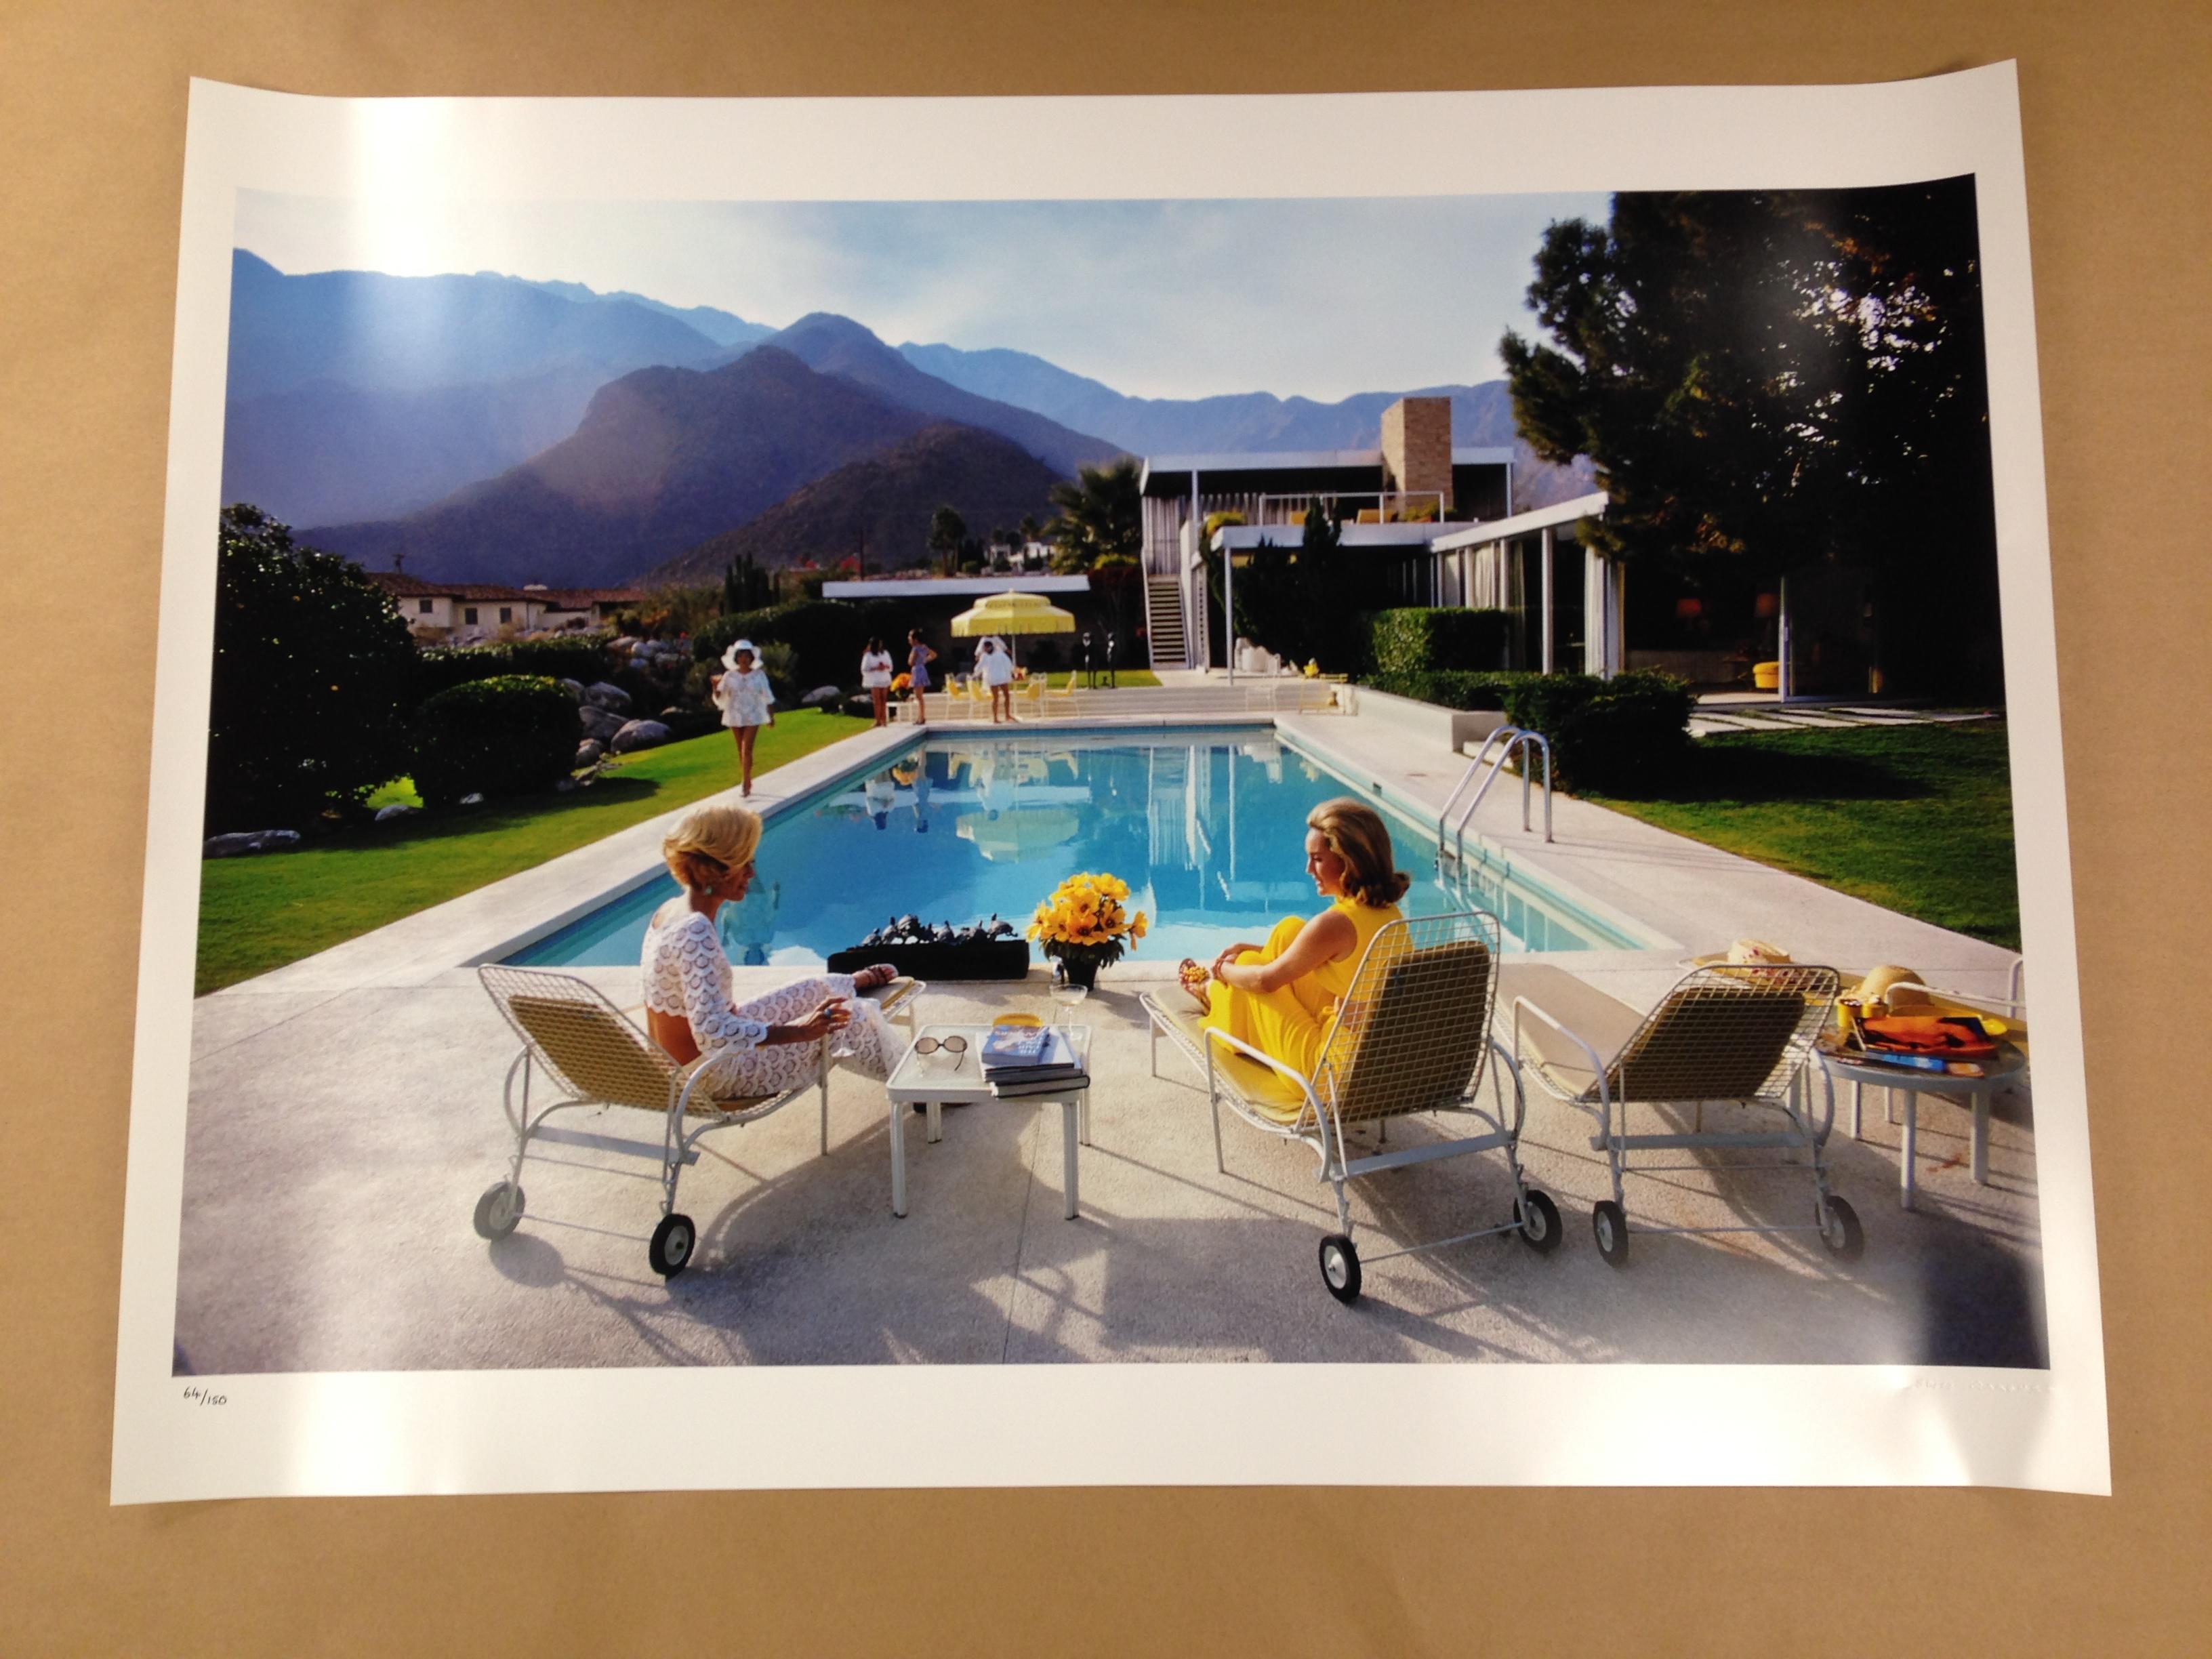 Slim Aarons 
Monte Carlo Beach Club
4 sizes available
Slim Aarons Estate Edition

Guests around the pool at the Monte Carlo Beach Club, Monaco, August 1970

Numbered and stamped by the Slim Aarons Estate. Certificate of Authenticity included.